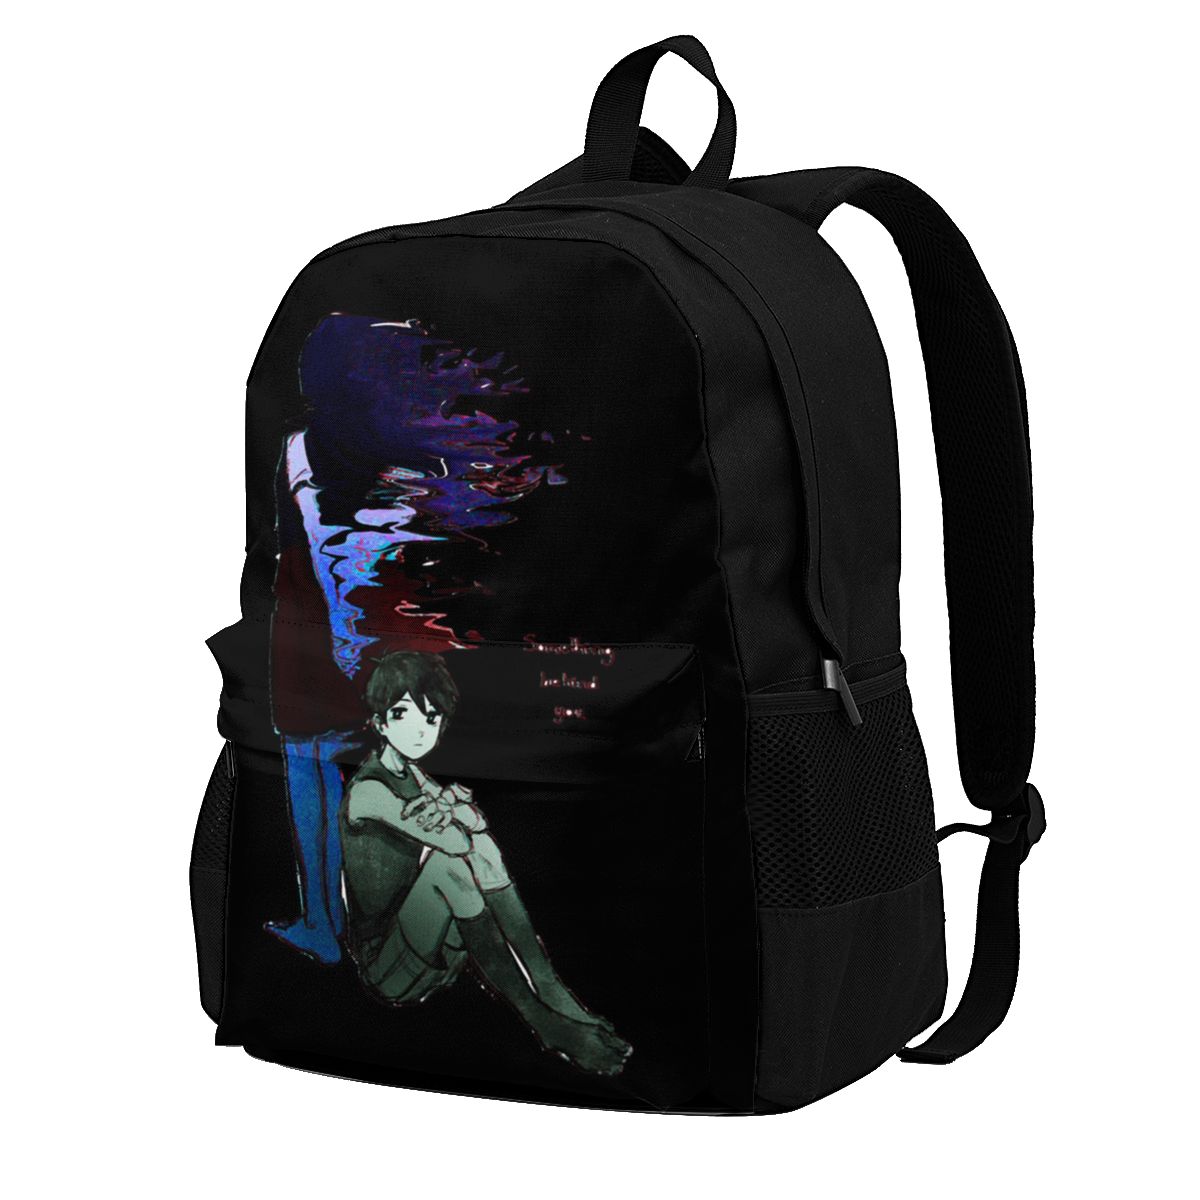 Omori Some Thing Behind You Backpacks Video Game Breathable Streetwear Polyester Backpack Cycling Youth Bags - Omori Plush